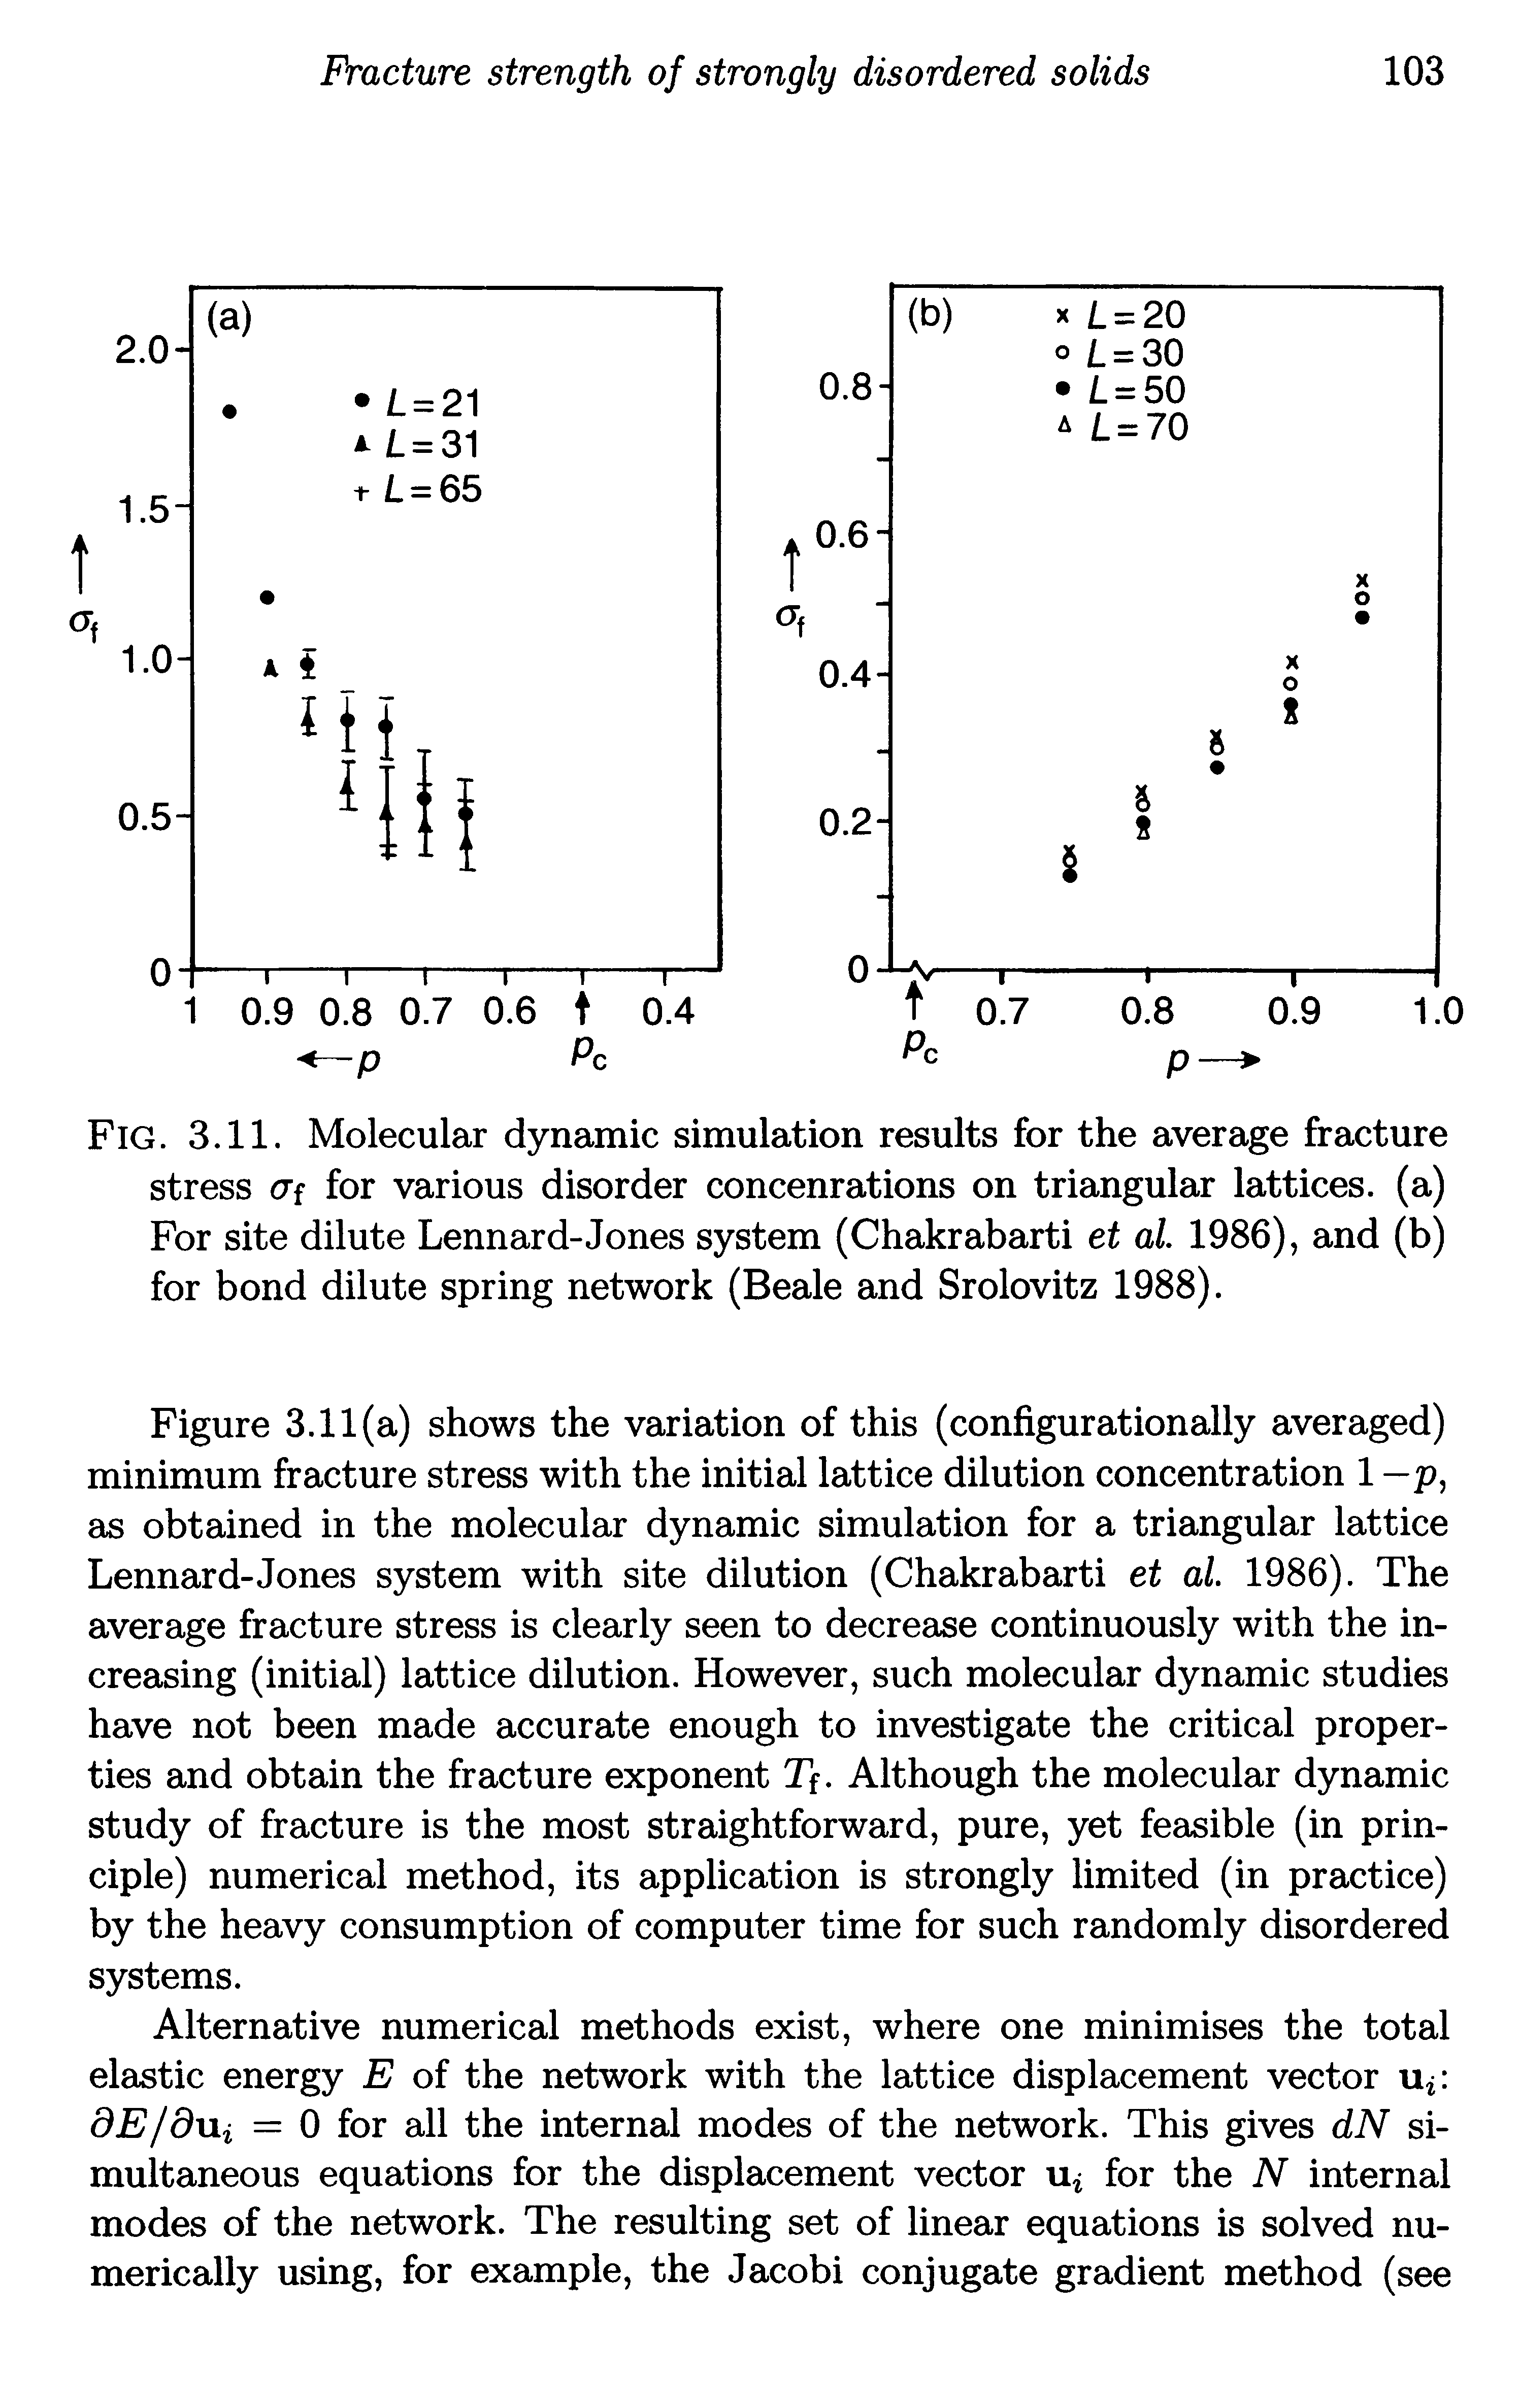 Fig. 3.11. Molecular dynamic simulation results for the average fracture stress CTf for various disorder concenrations on triangular lattices, (a) For site dilute Lennard-Jones system (Chakrabarti et al 1986), and (b) for bond dilute spring network (Beale and Srolovitz 1988).